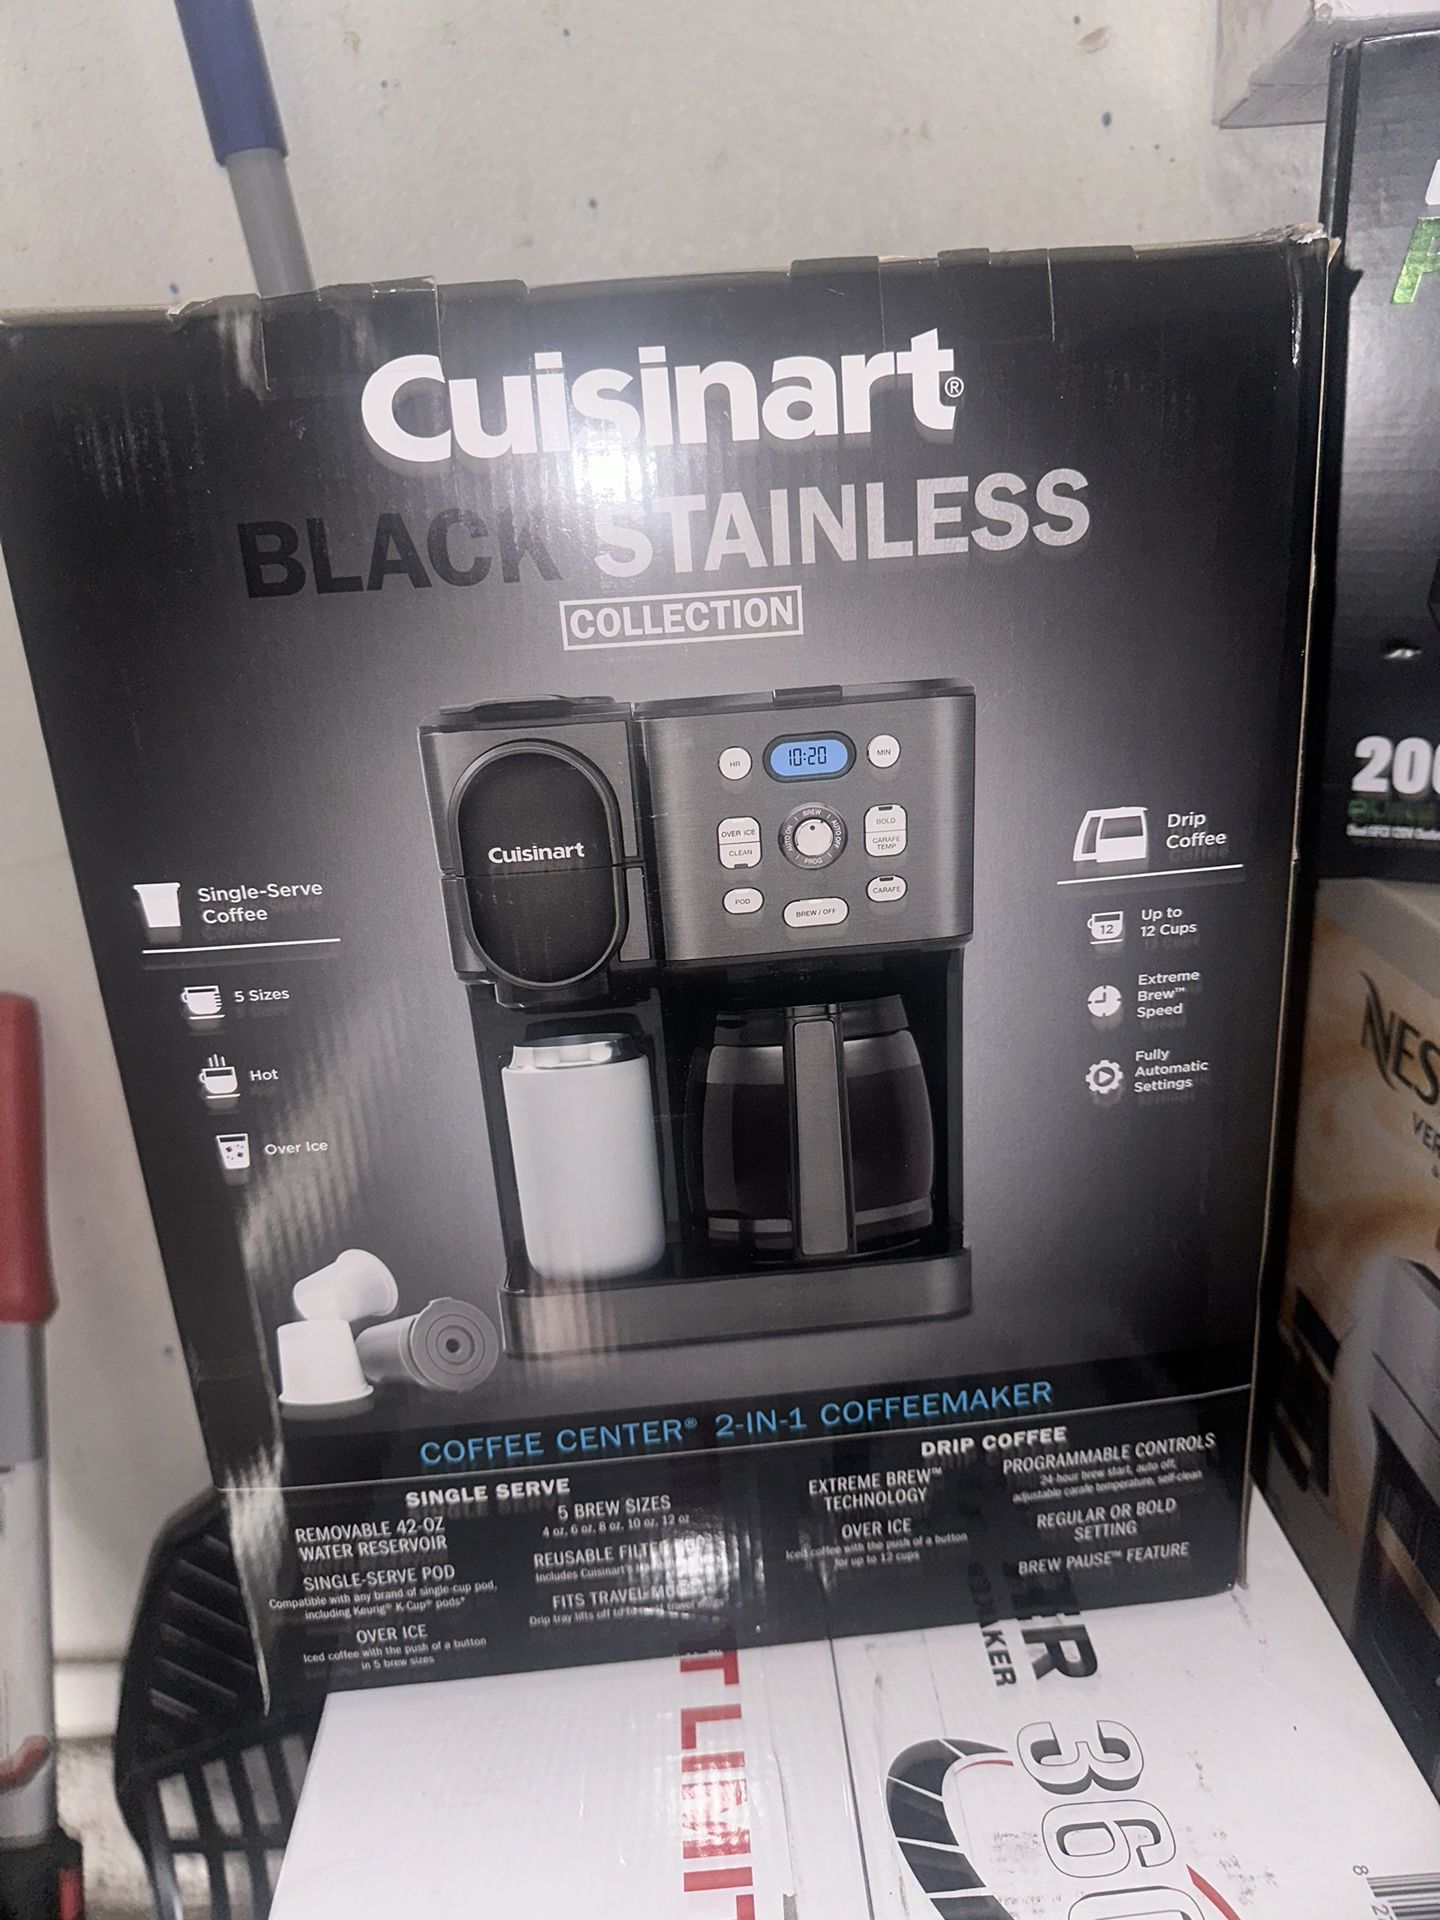 Cuisinart 2-IN-1 Center Combo Brewer Coffee Maker, Black Stainless - 250 half off $125